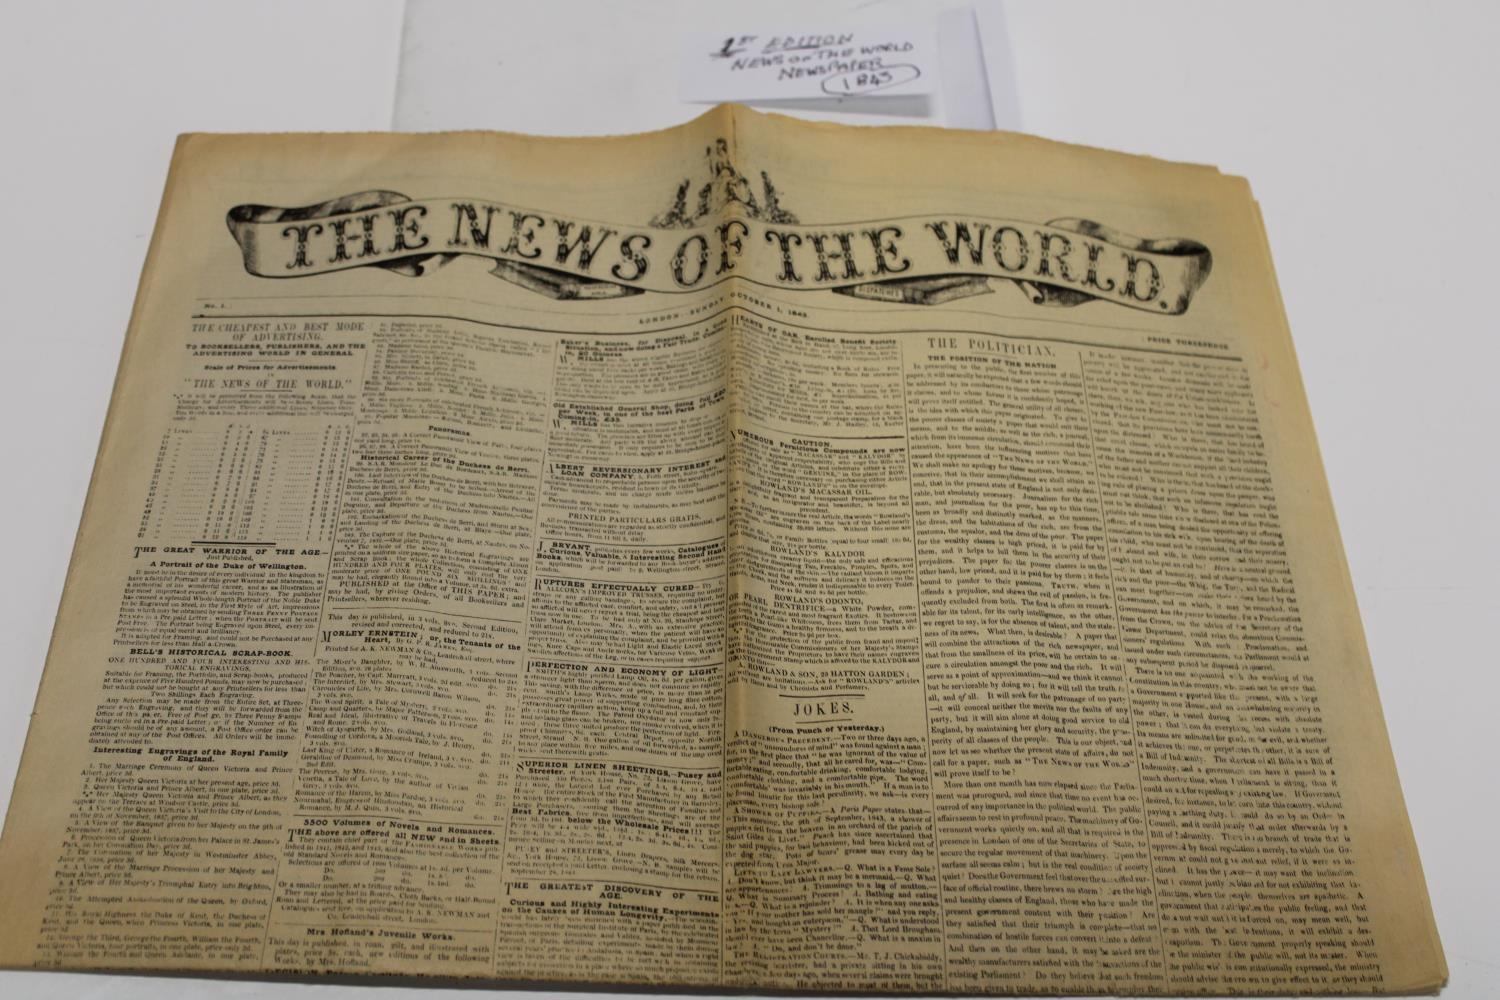 A first edition of The News of The world newspaper 1843